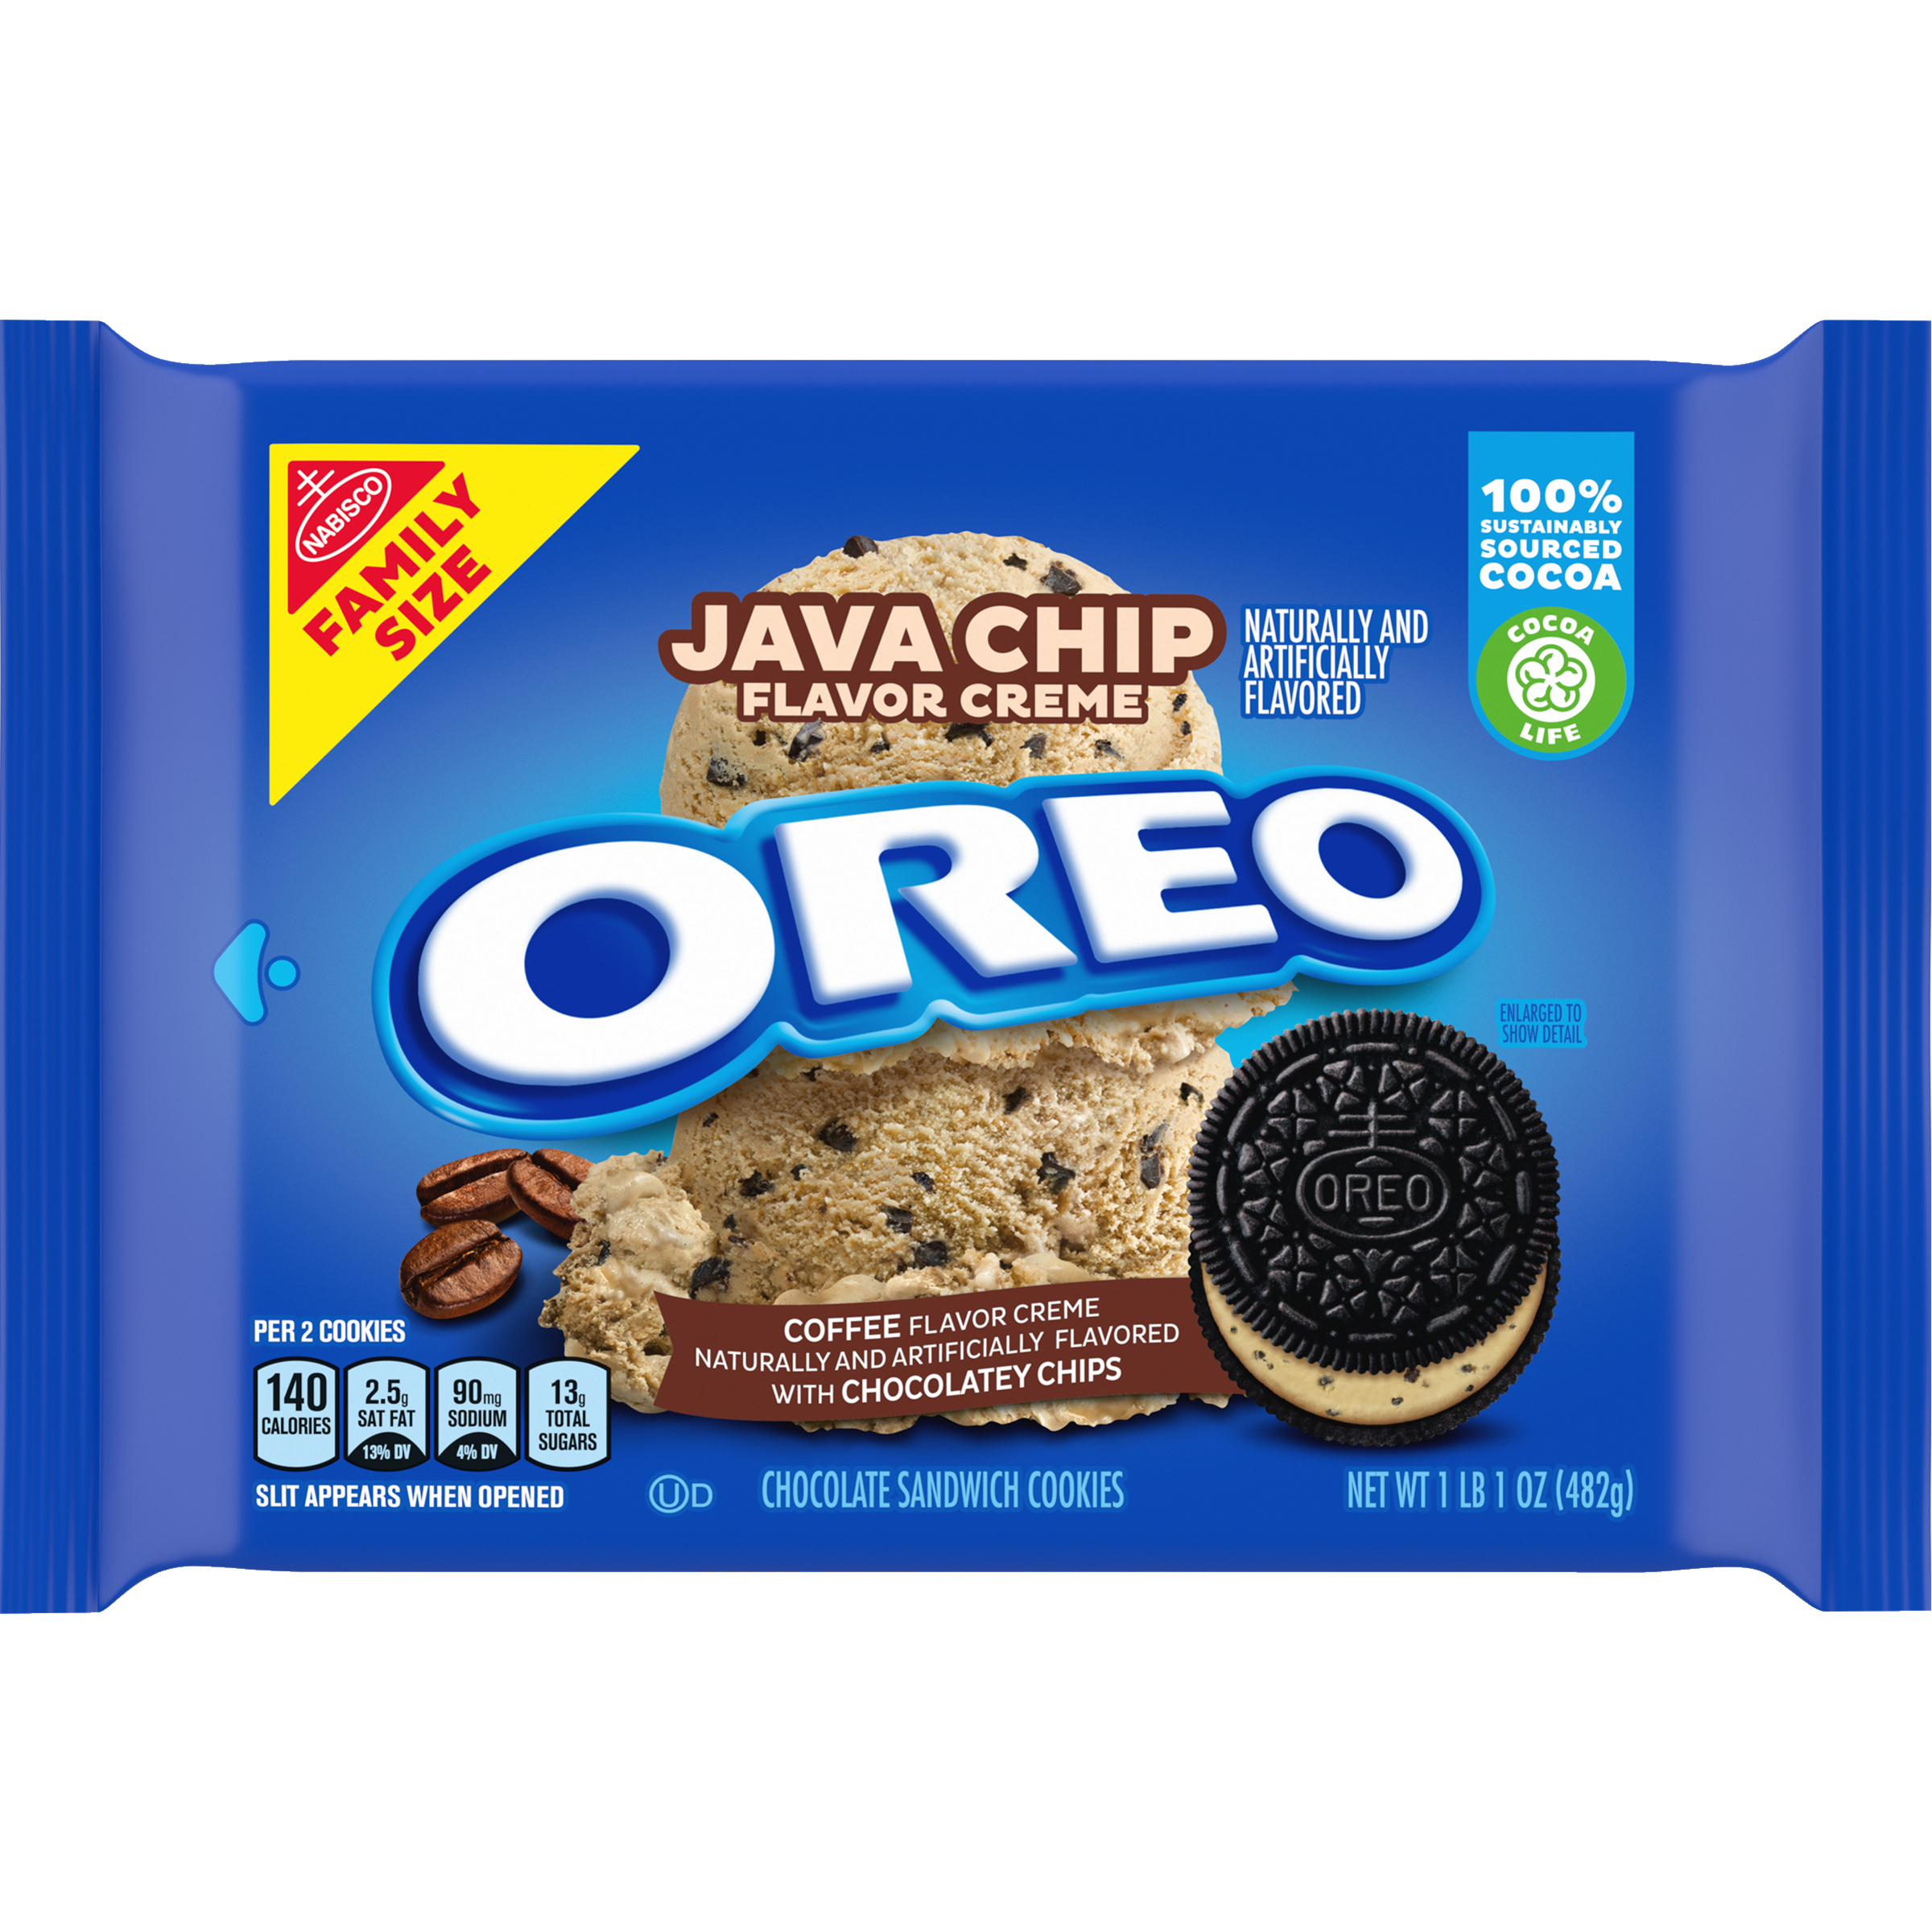 OREO Java Chip Flavored Creme Chocolate Sandwich Cookies, Family Size, 17 oz-1